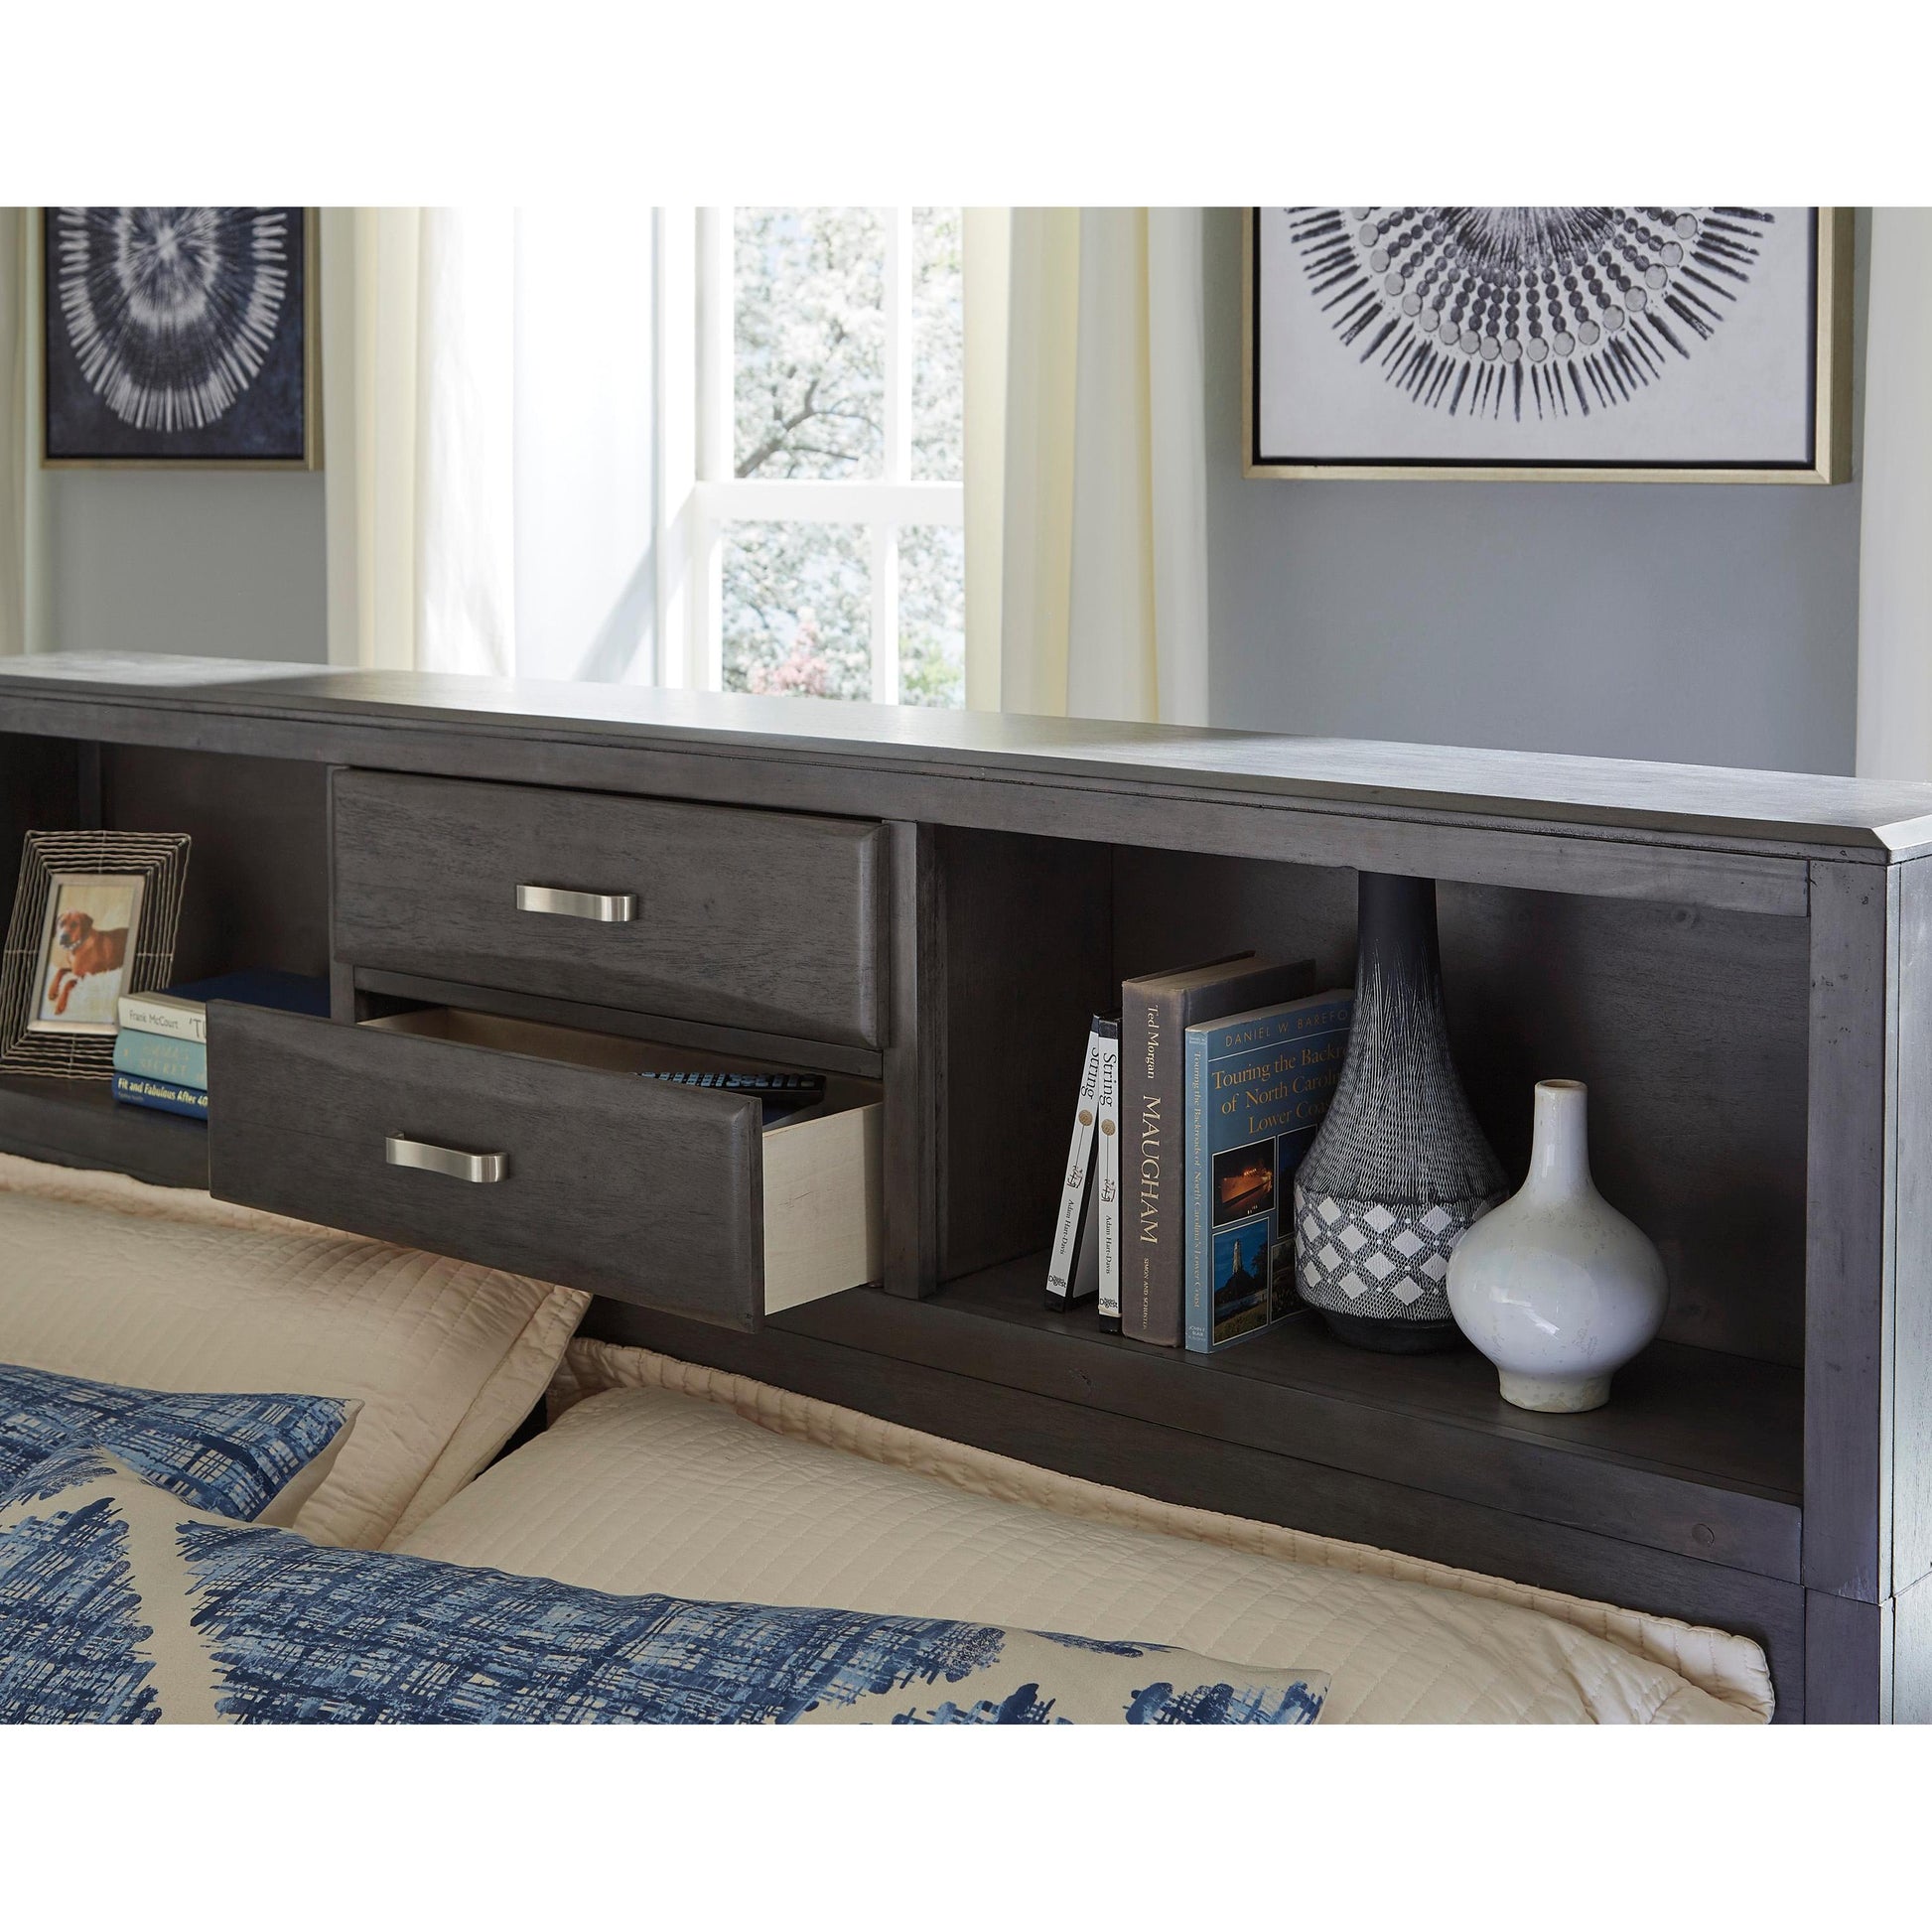 Signature Design by Ashley Caitbrook King Bookcase Bed with Storage B476-69/B476-66/B476-99